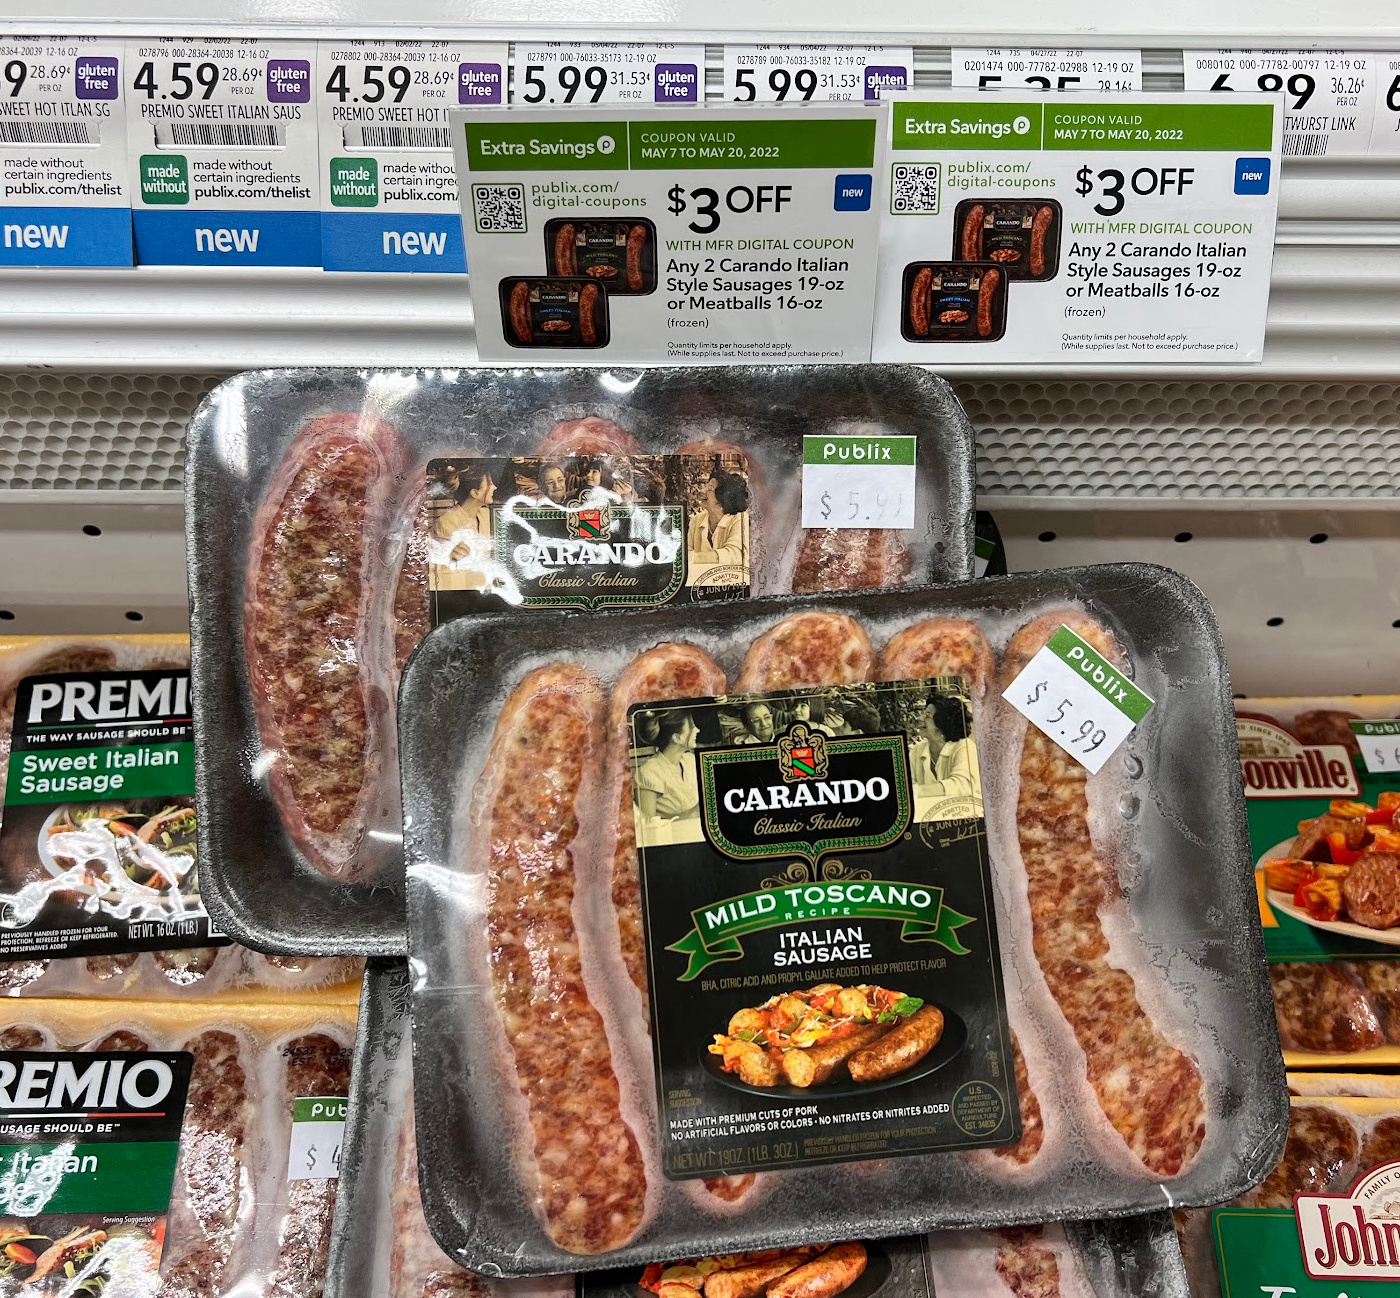 Use The Digital Coupon To Grab A Super Deal On Carando Italian Sausage At Publix - Try My Italian Sausage Flatbread Pizza on I Heart Publix 4